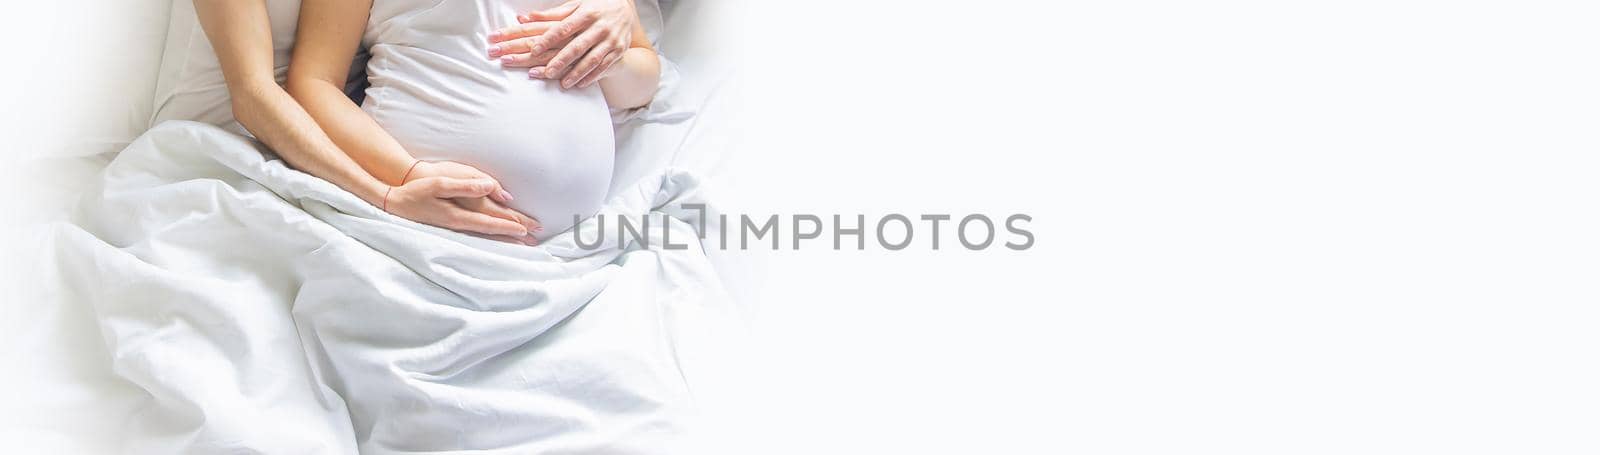 Pregnant woman with man hug belly in bed. Selective focus. people.